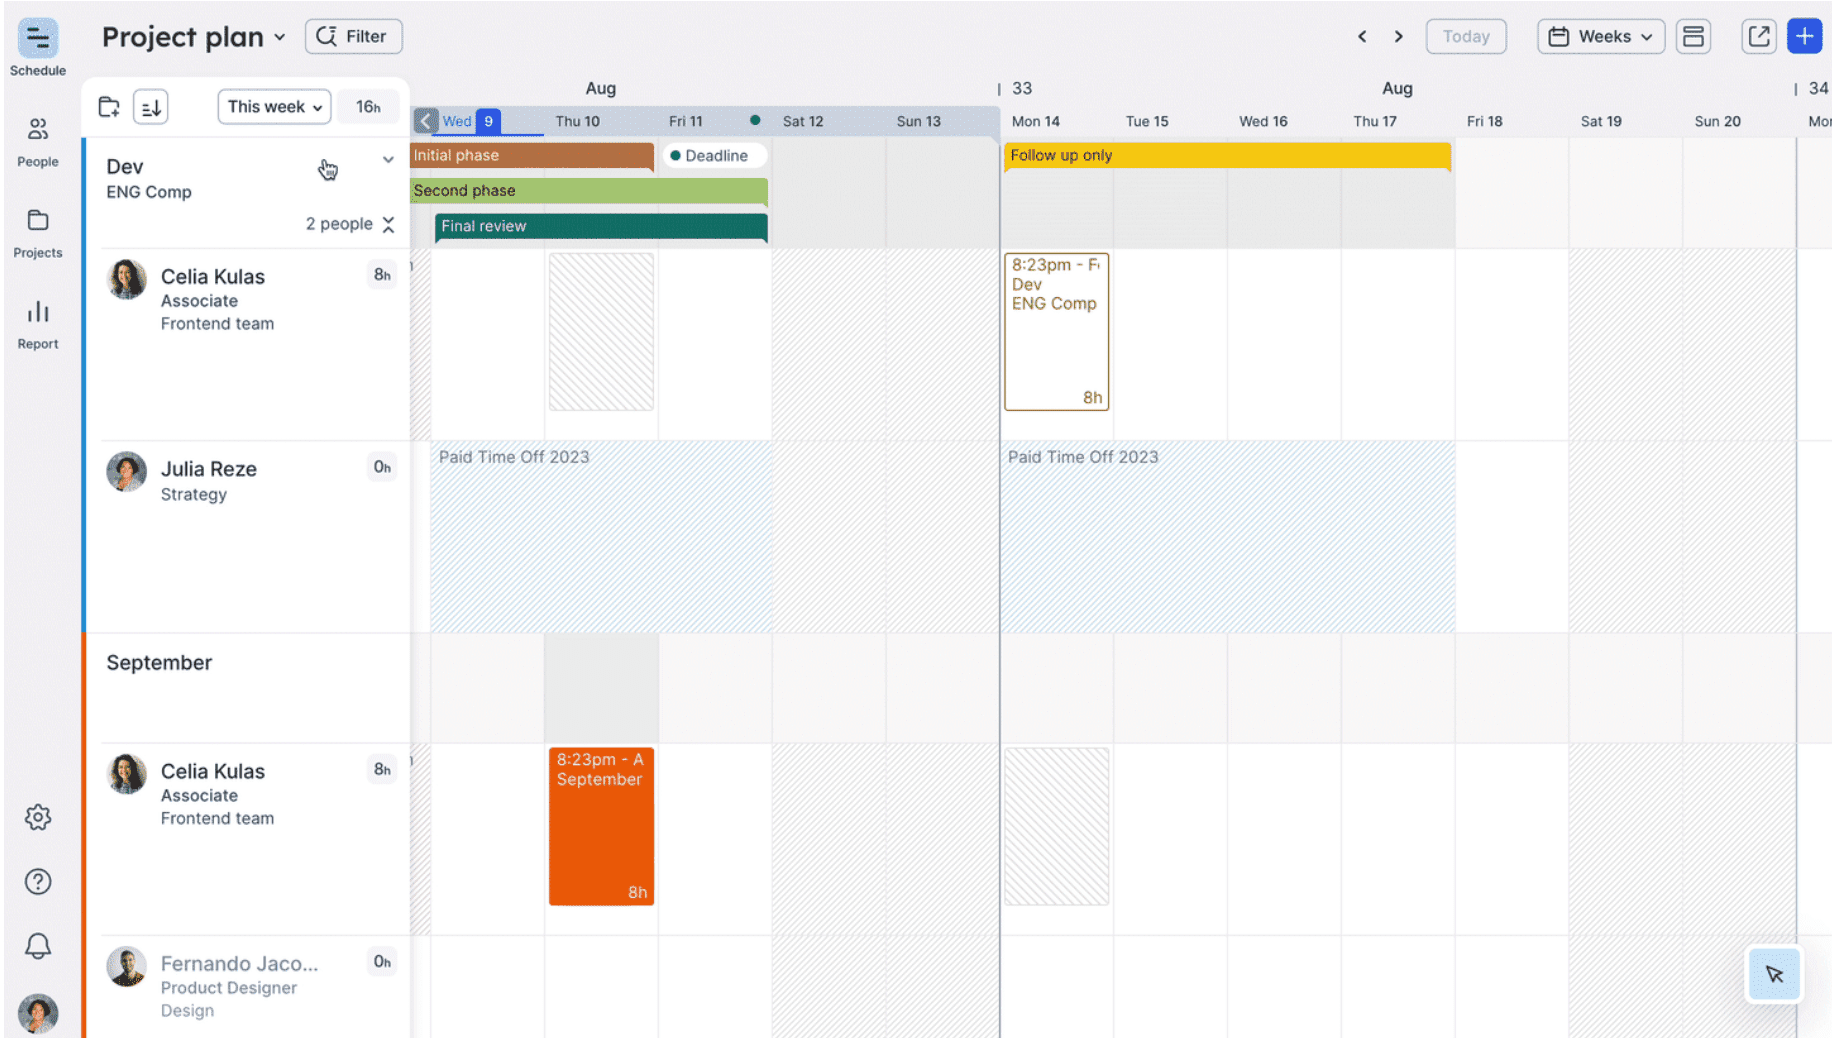 View of a project timeline in Float